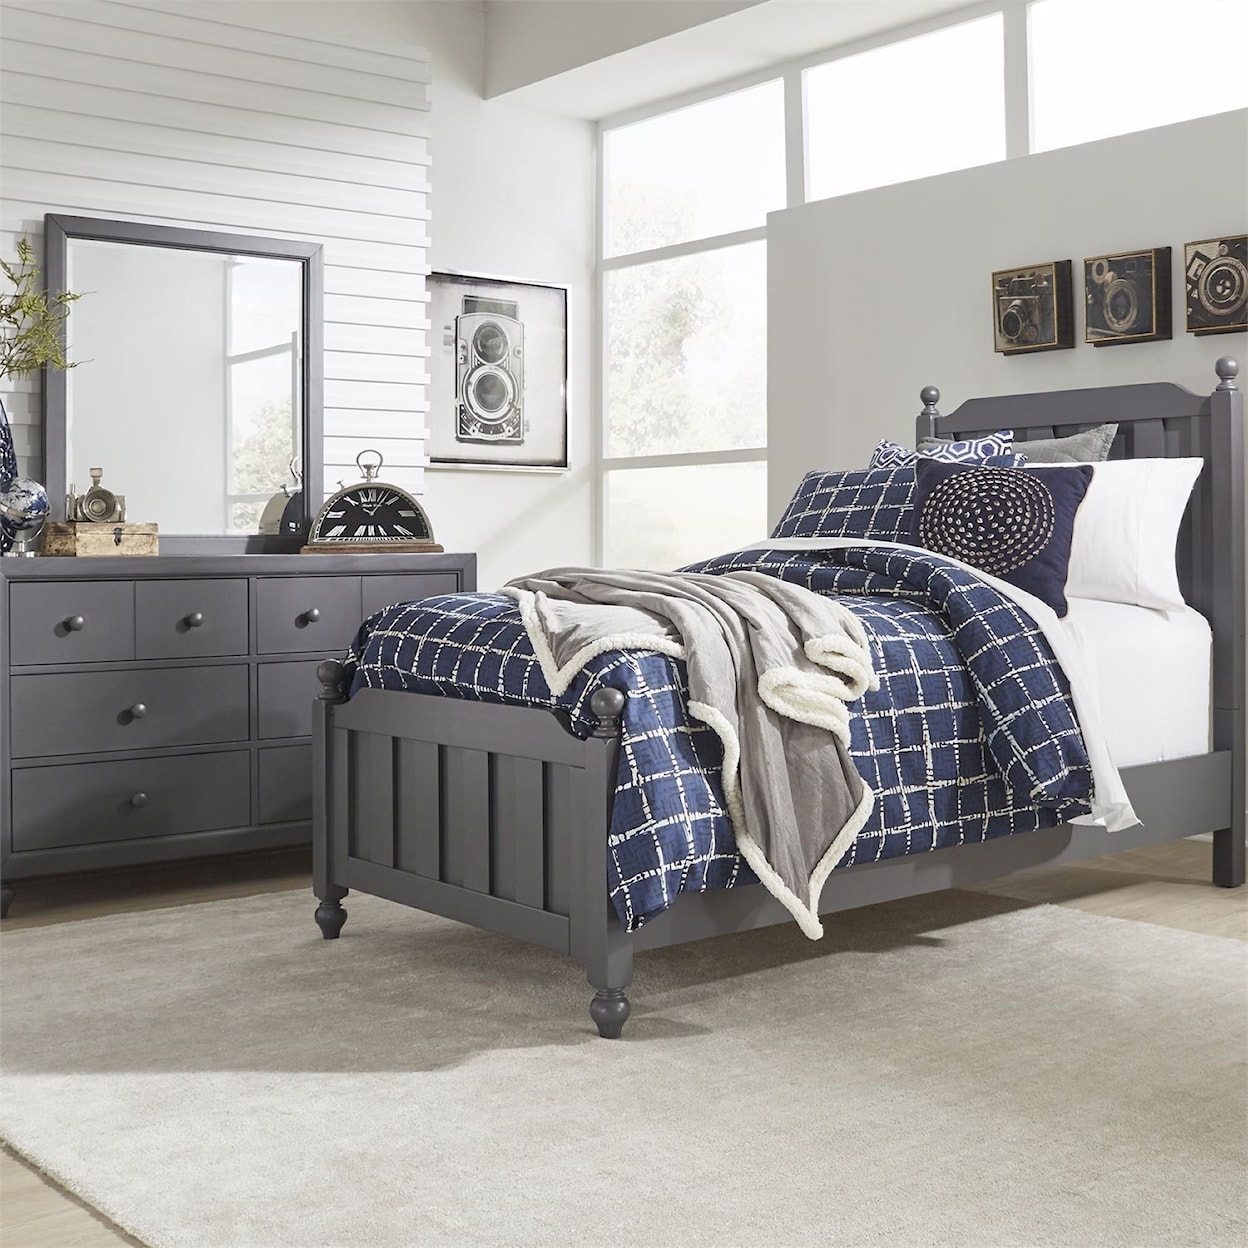 Liberty Furniture Cottage View Twin Bedroom Group